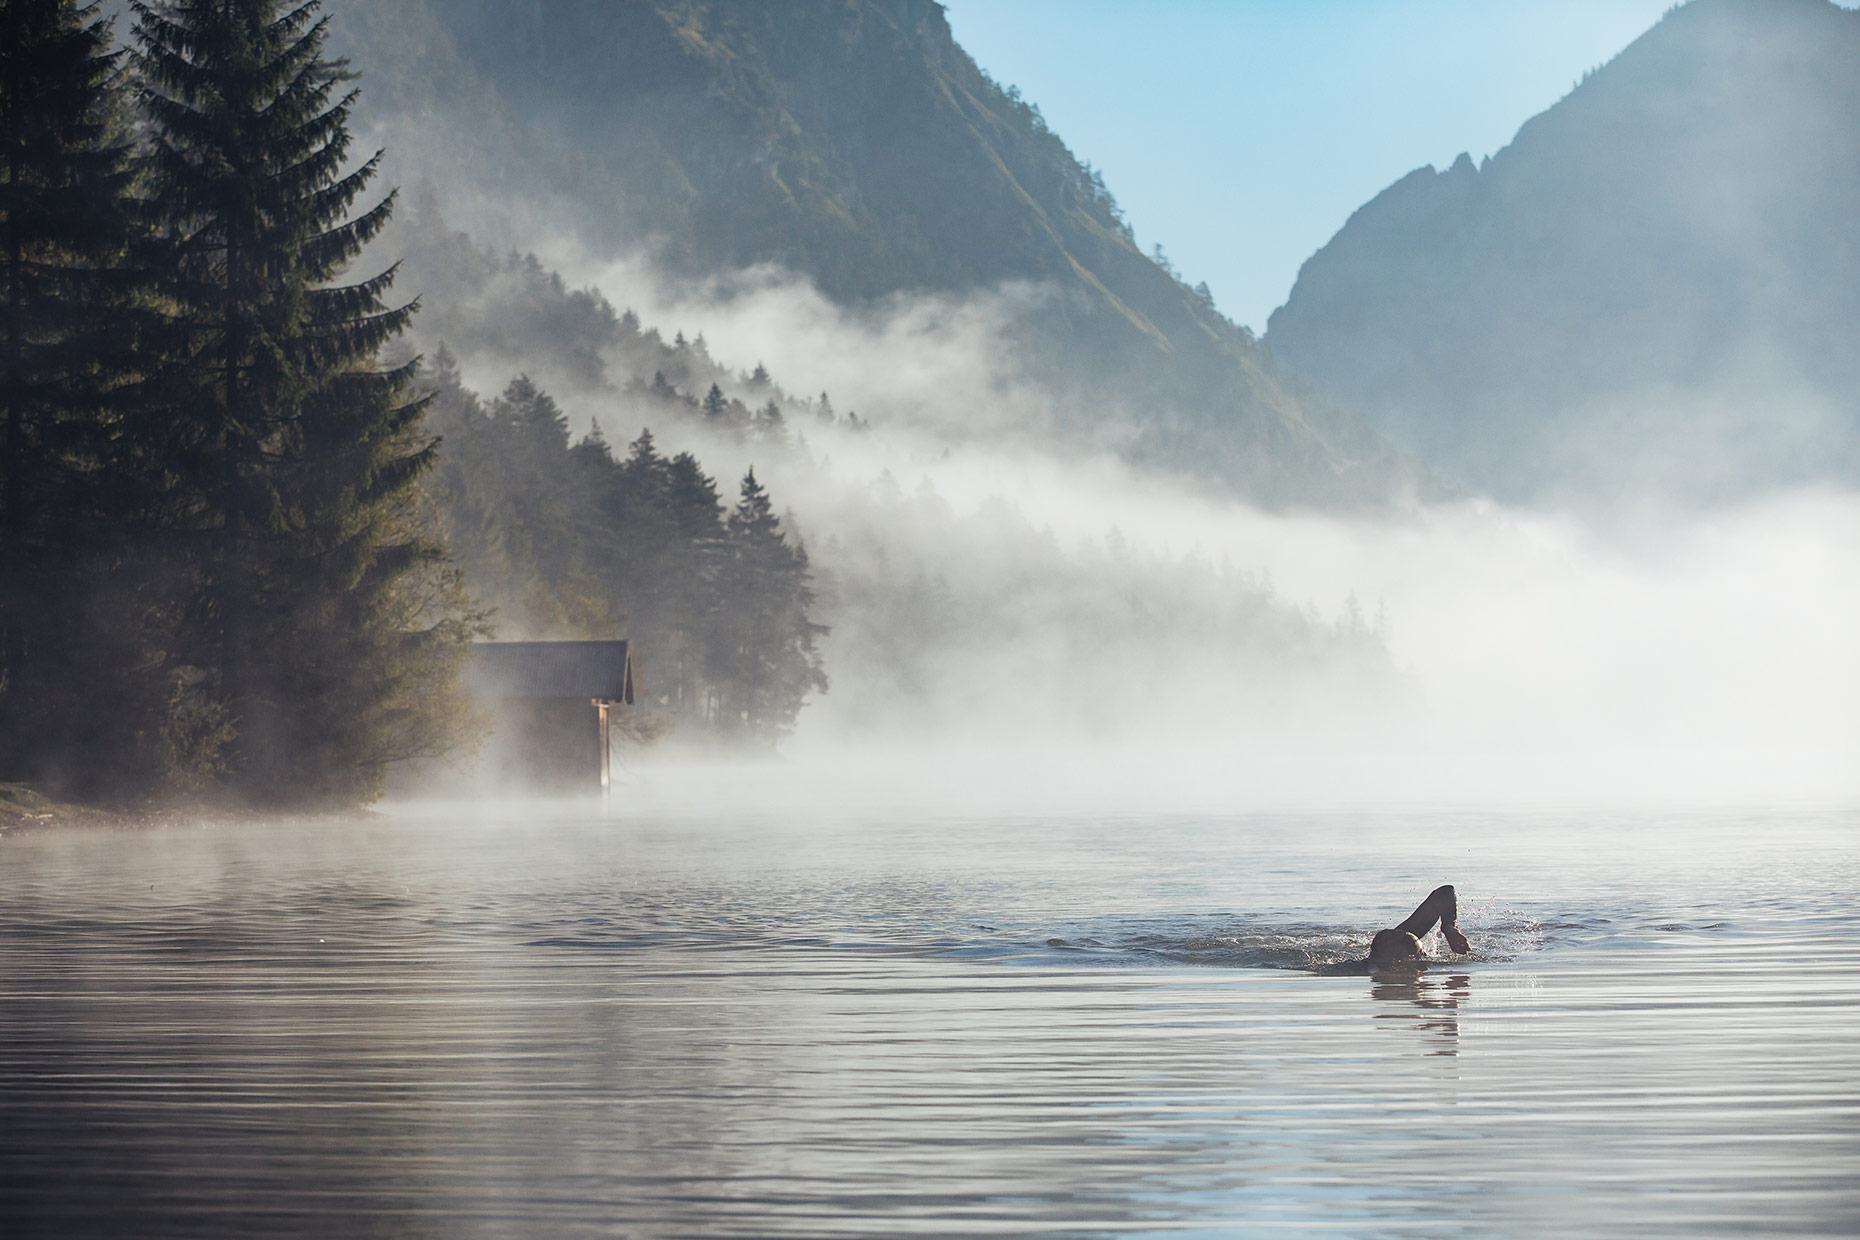 Early morning fog rising up from an alpine lake just after sunrise, a triathlete swimming in the distance 